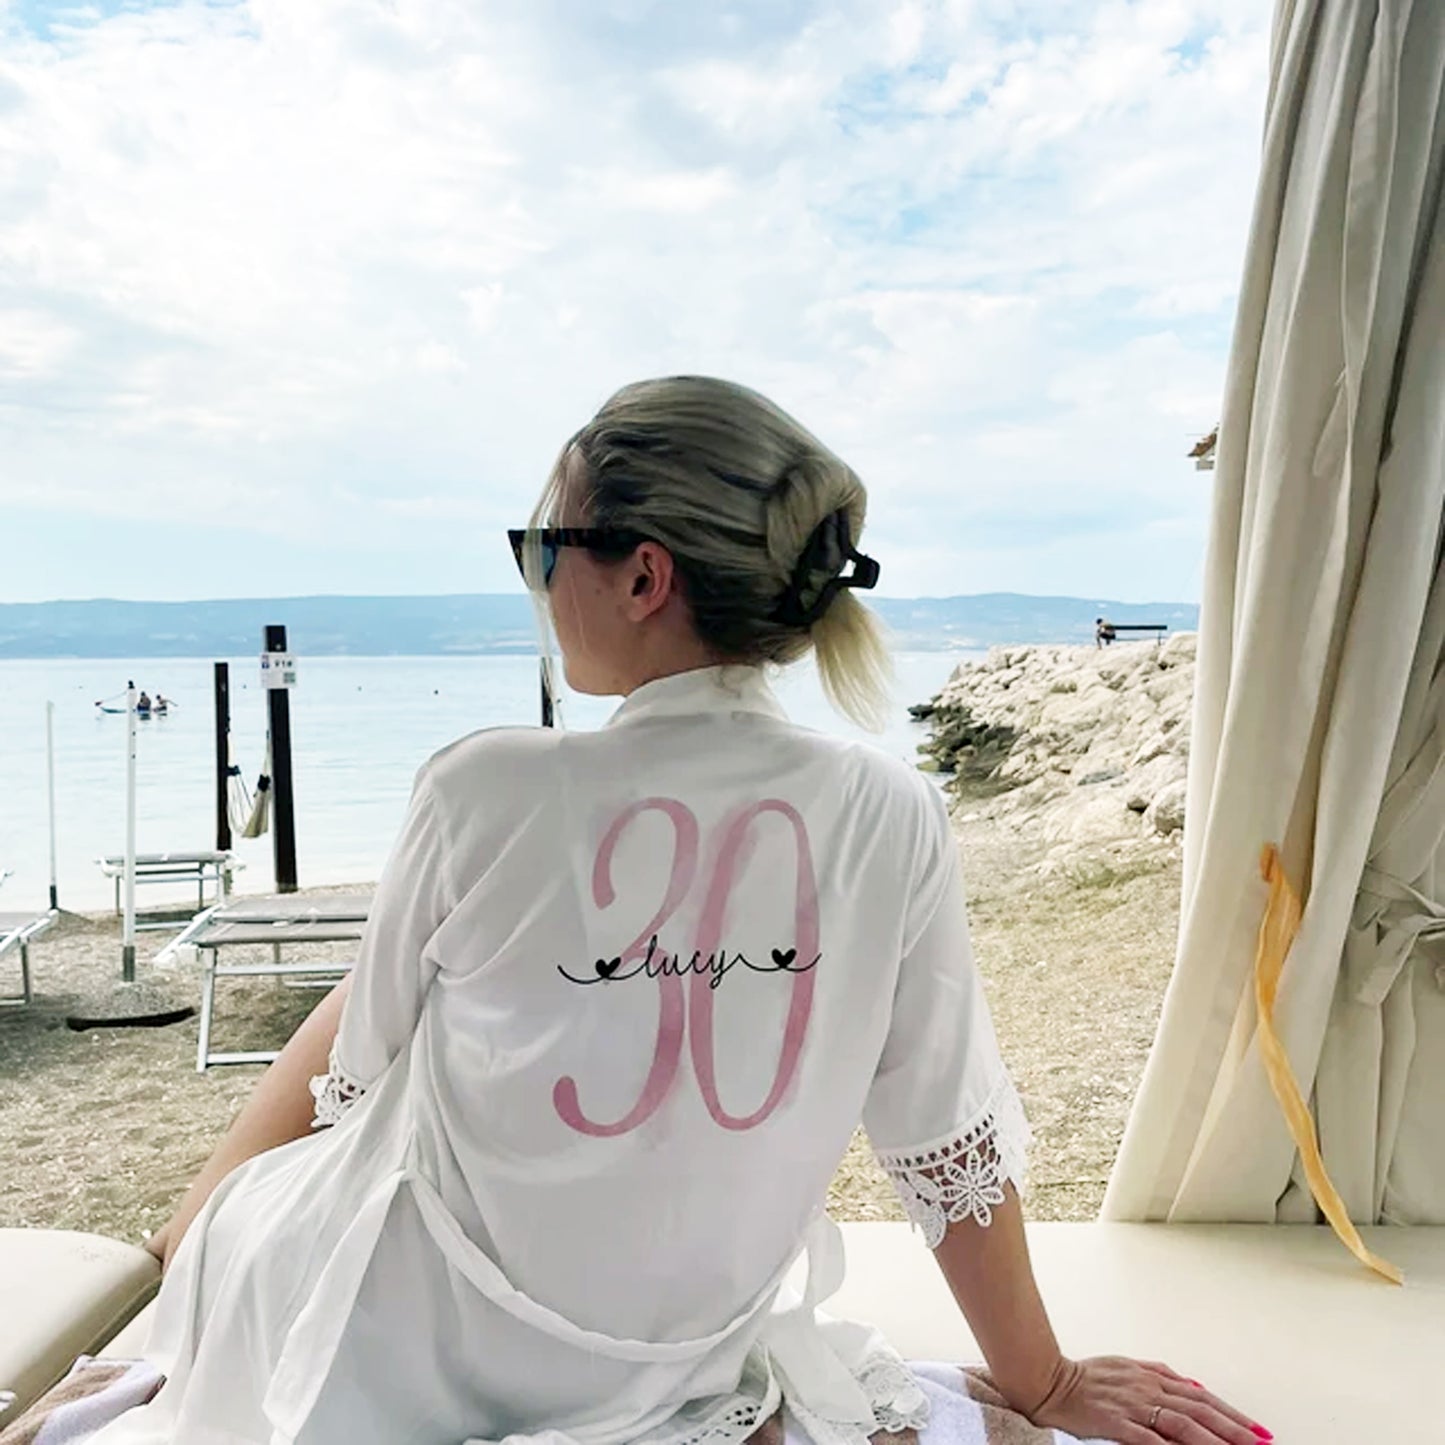 A set of stylish, customized pajamas and robe for a 30th birthday celebration, featuring elegant design elements and the number '30' prominently displayed